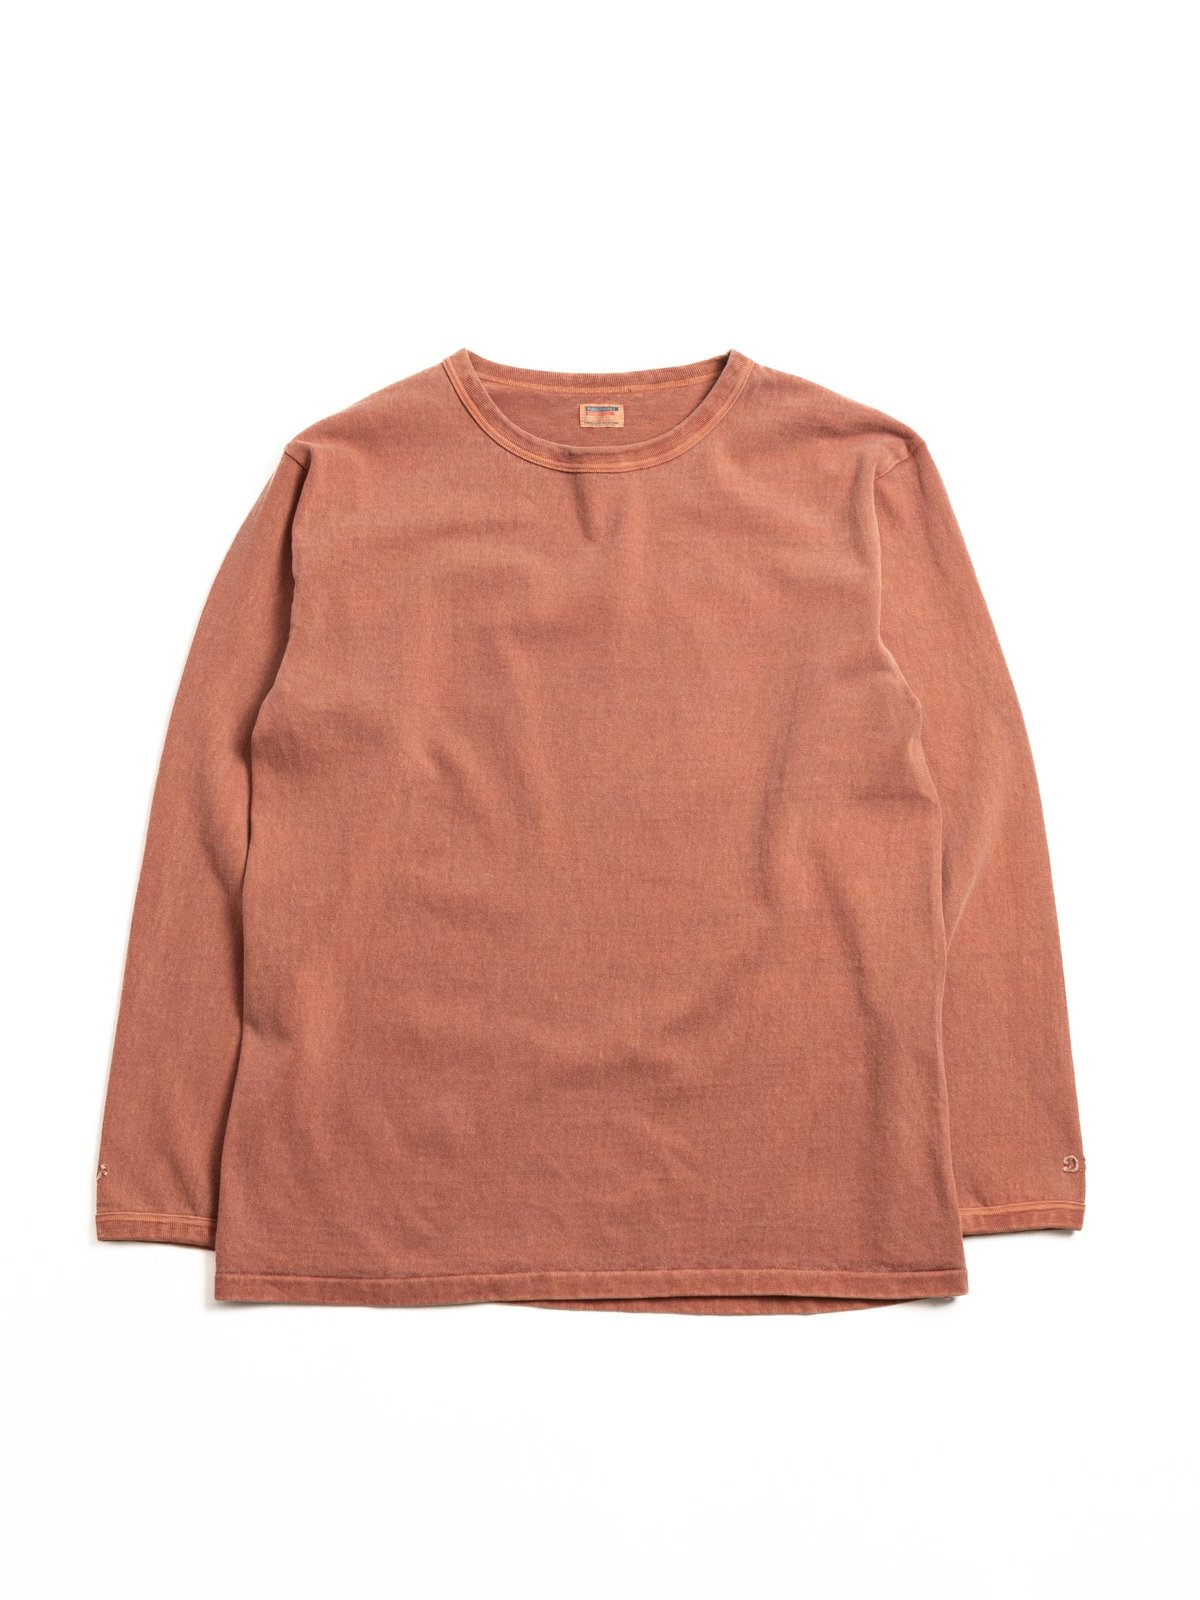 HEAVY WEIGHT PIGMENT DYED L/S TEE BRICK RED - Image 1